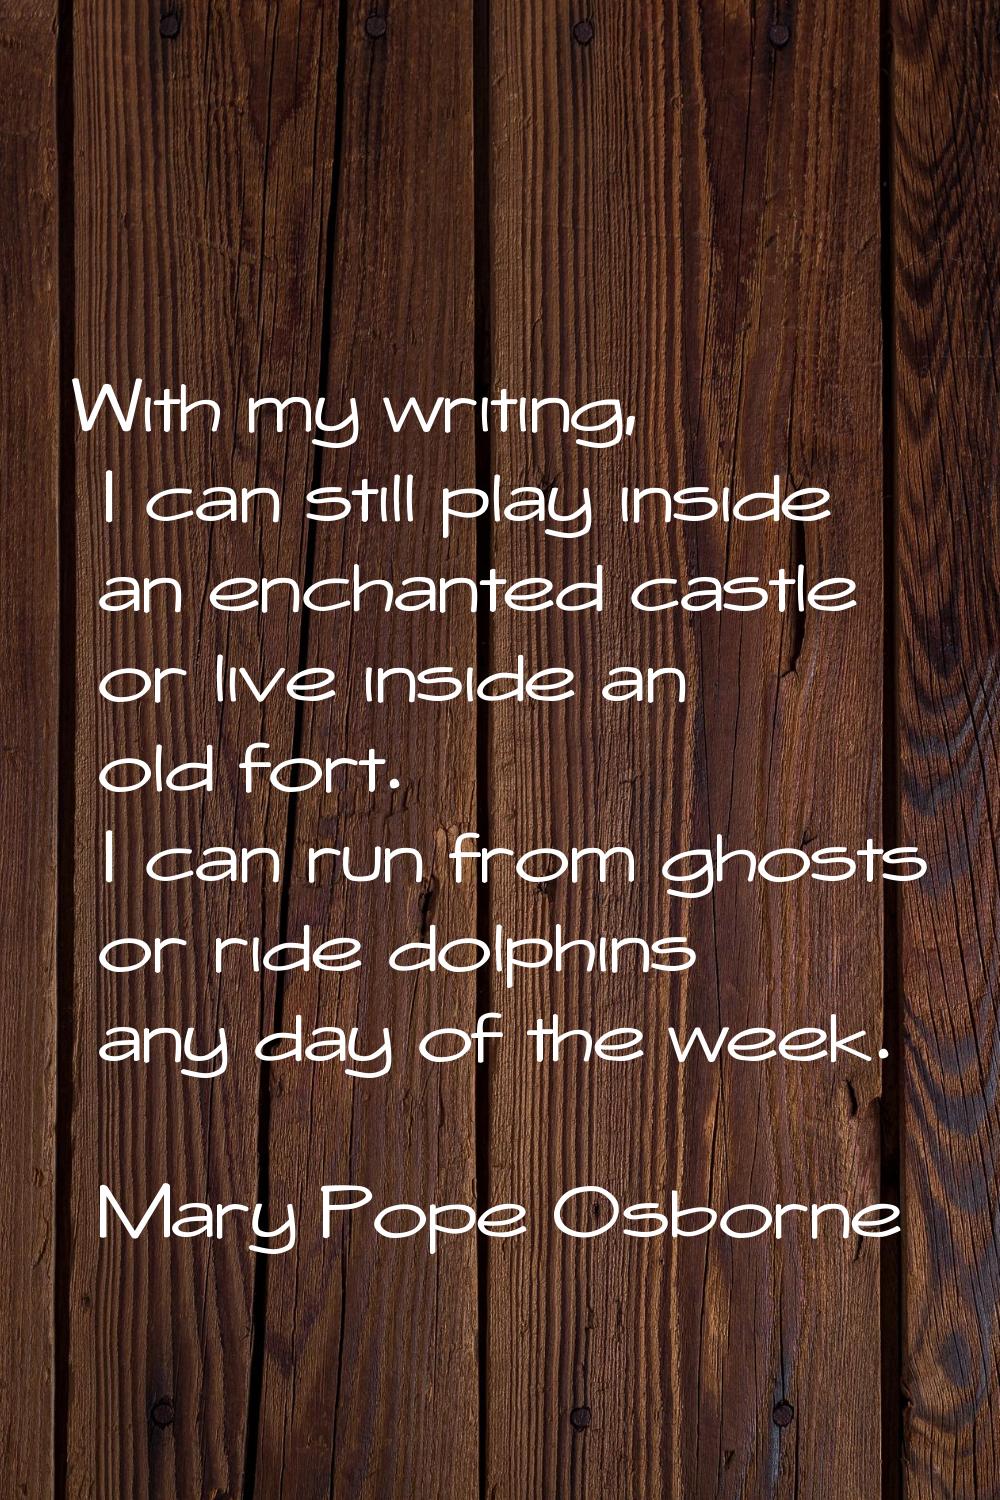 With my writing, I can still play inside an enchanted castle or live inside an old fort. I can run 